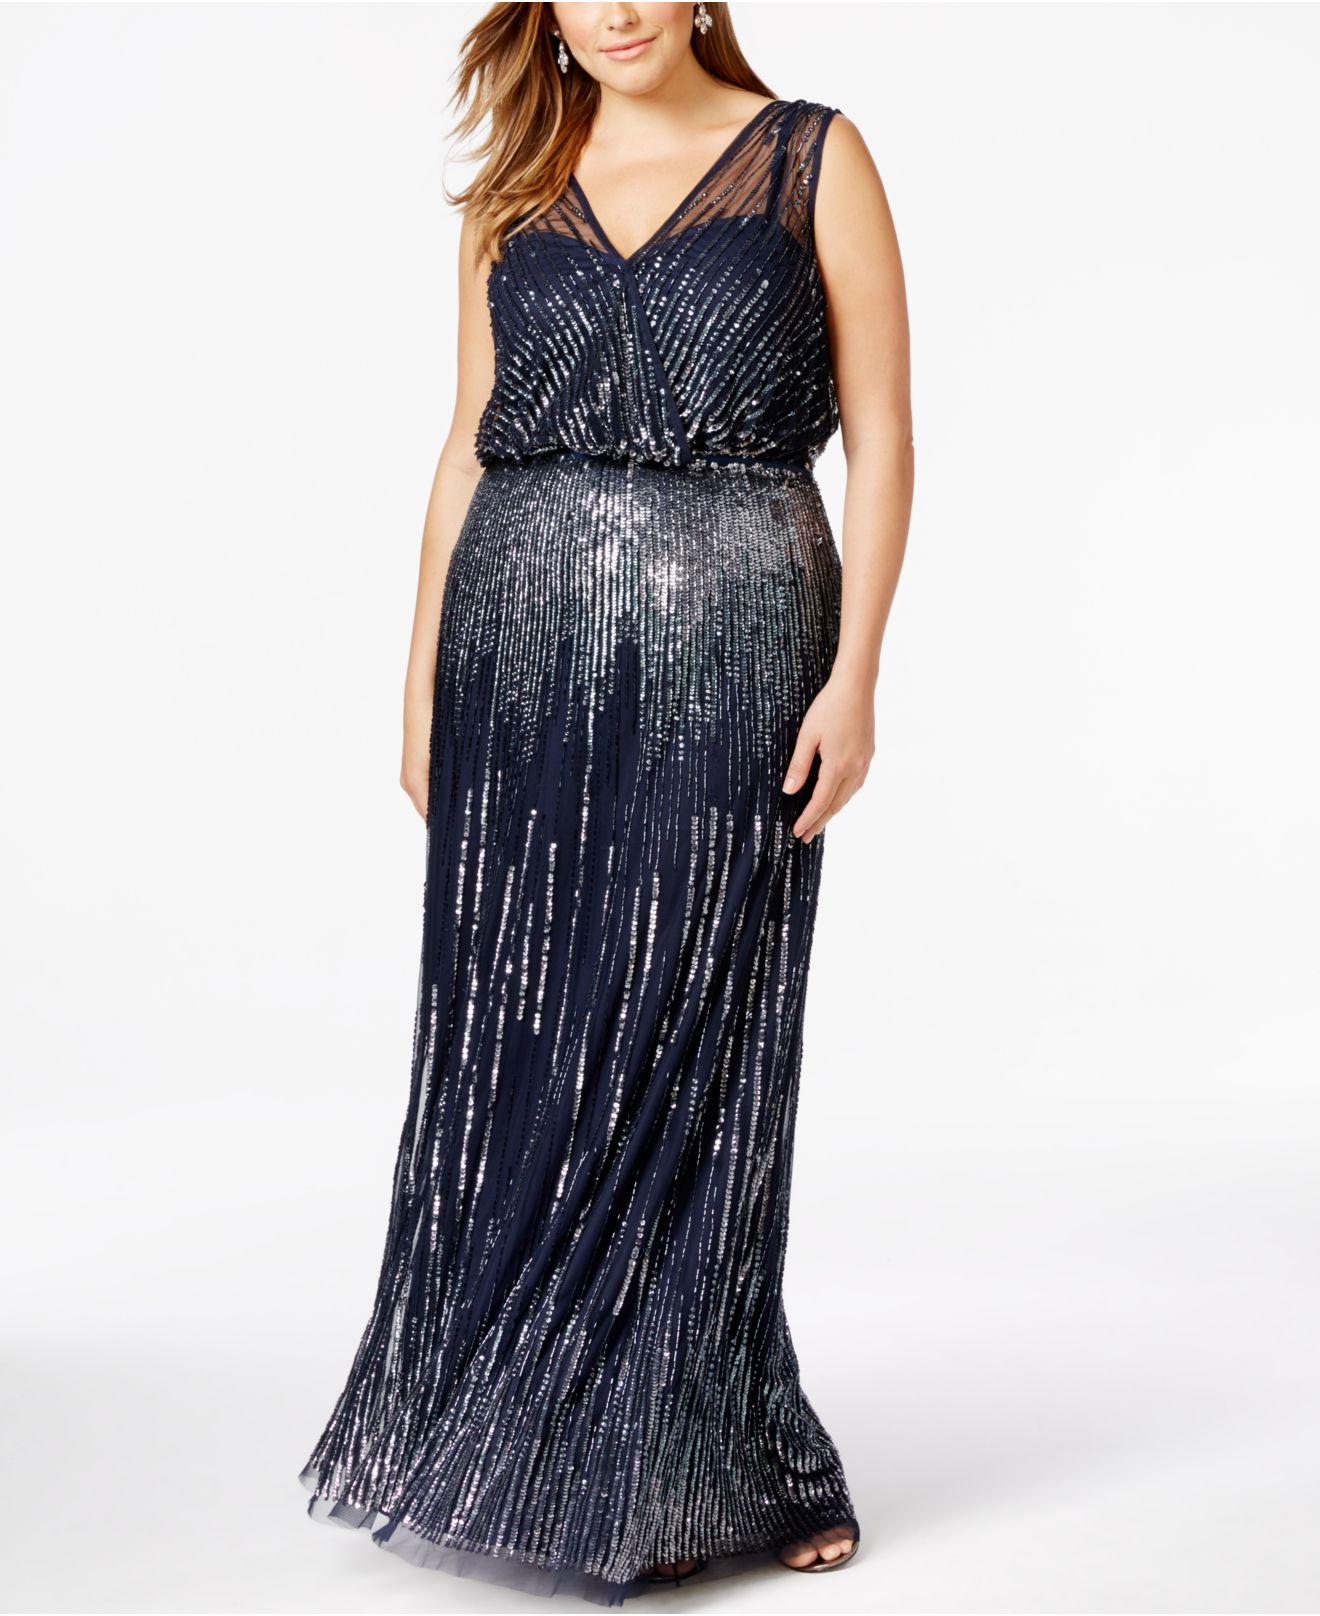 Lyst - Adrianna Papell Plus Size Beaded Faux-wrap Evening Gown in Blue